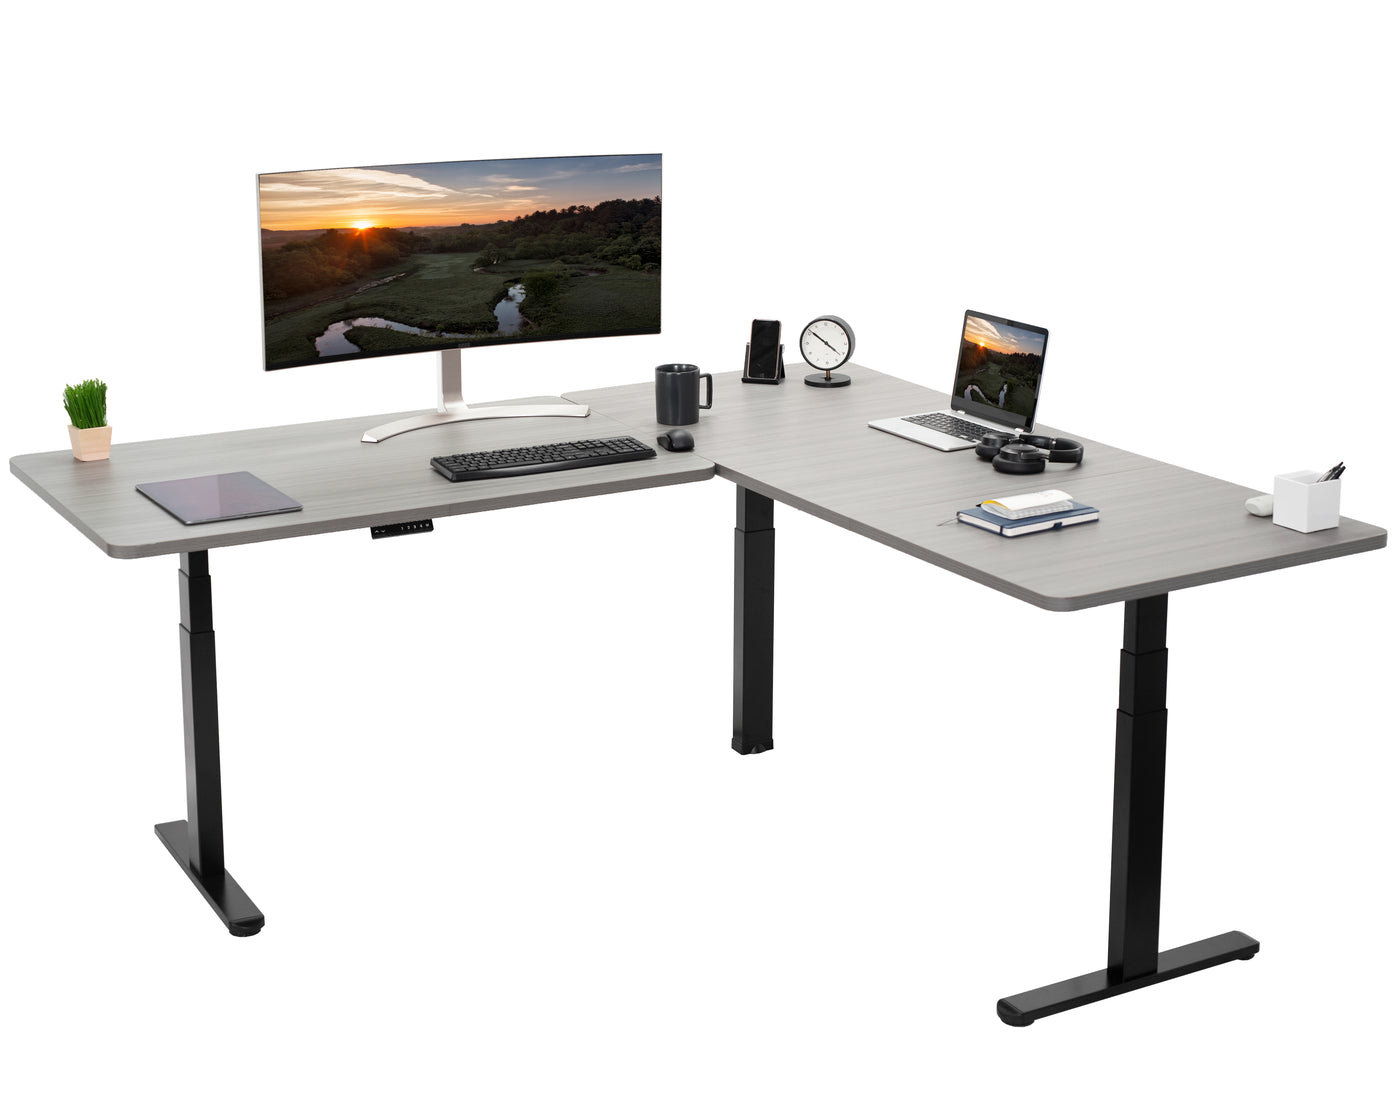 Enjoy a spacious workstation that accommodates an active work life with the Corner 77" x 71" Electric Desk